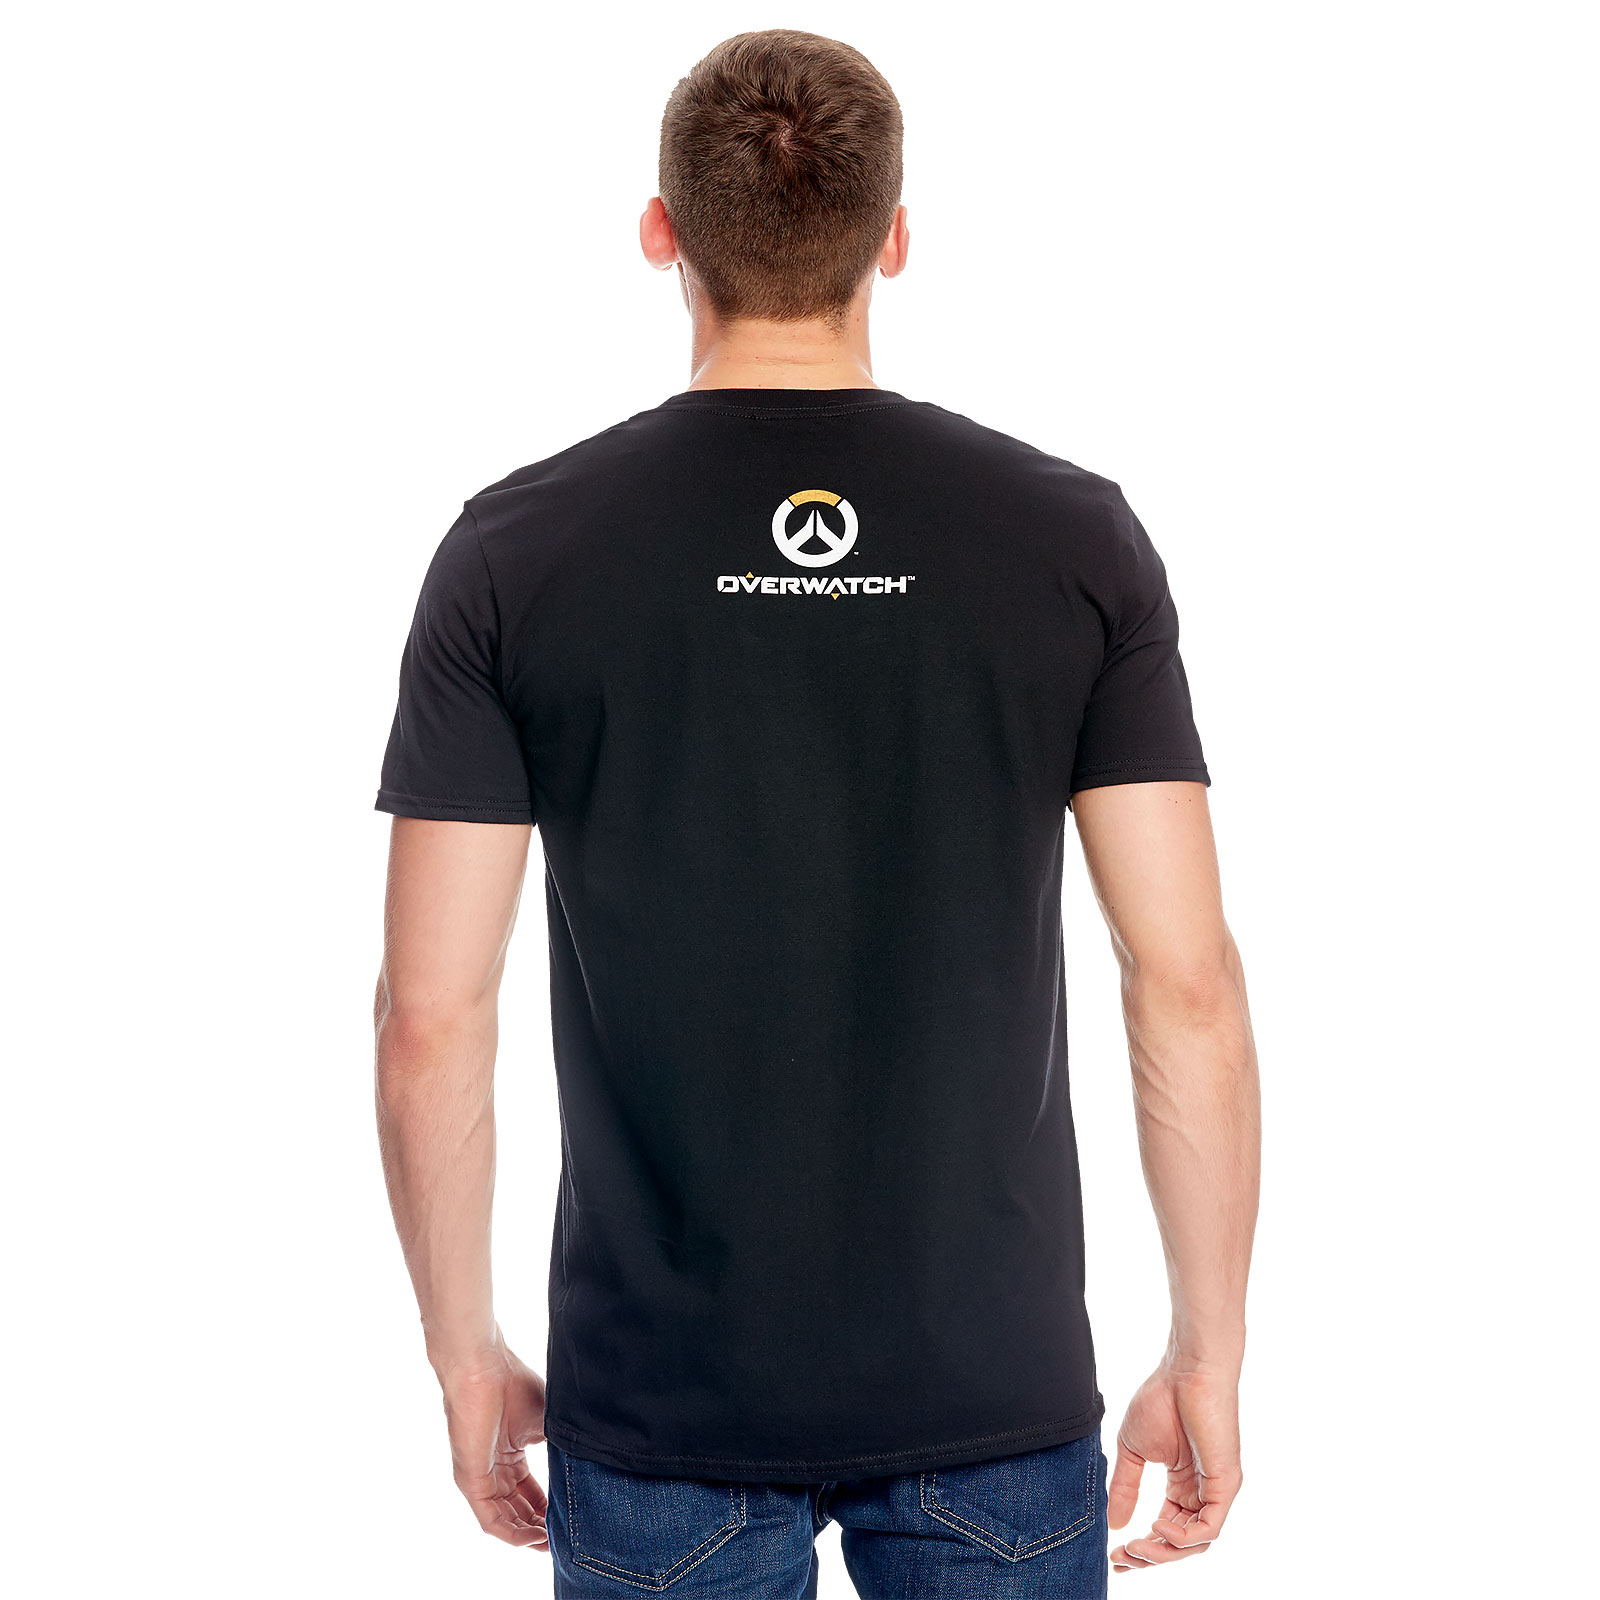 Overwatch - For the Good T-Shirt Black